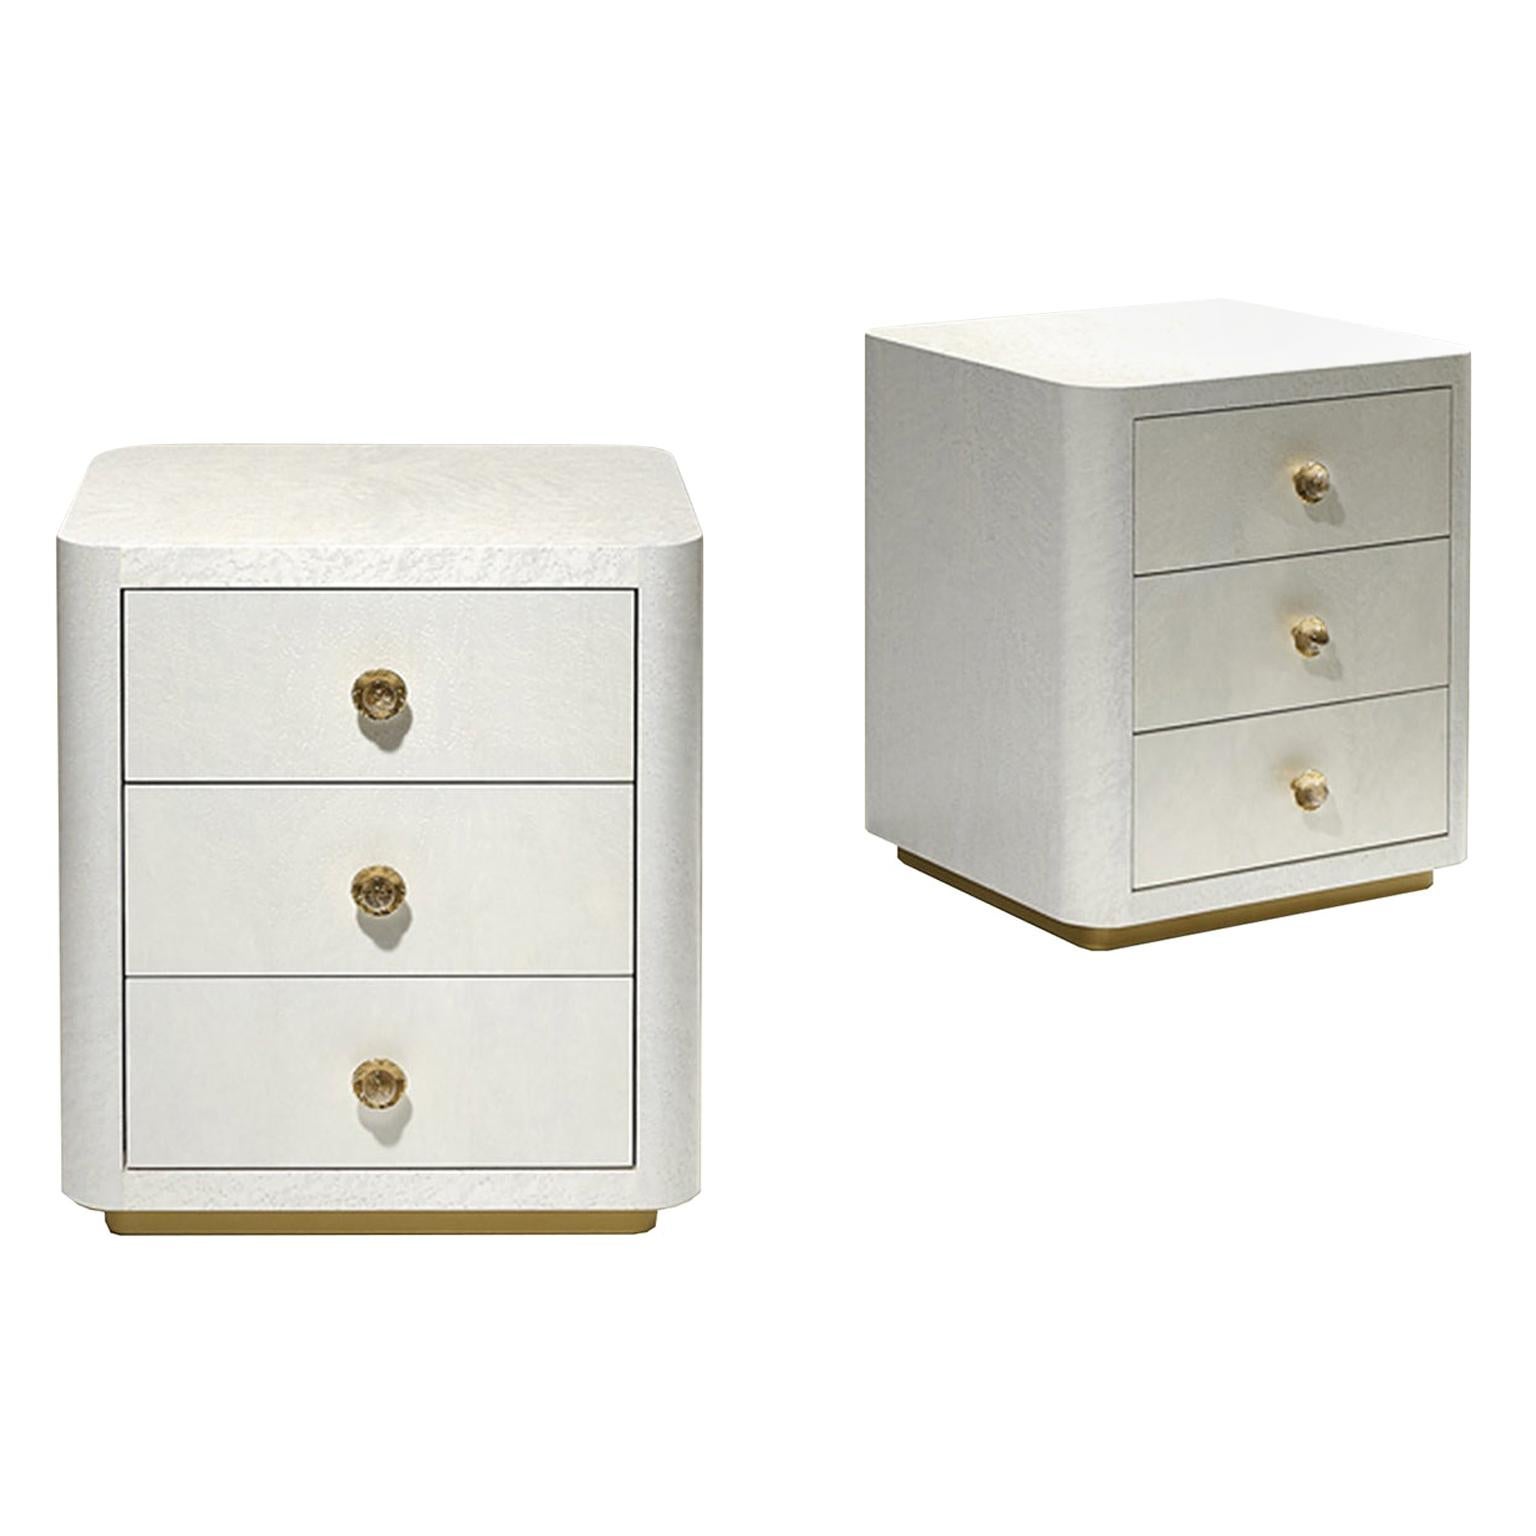 Blossom Contemporary and Customizable Bedside Table by Luísa Peixoto For Sale